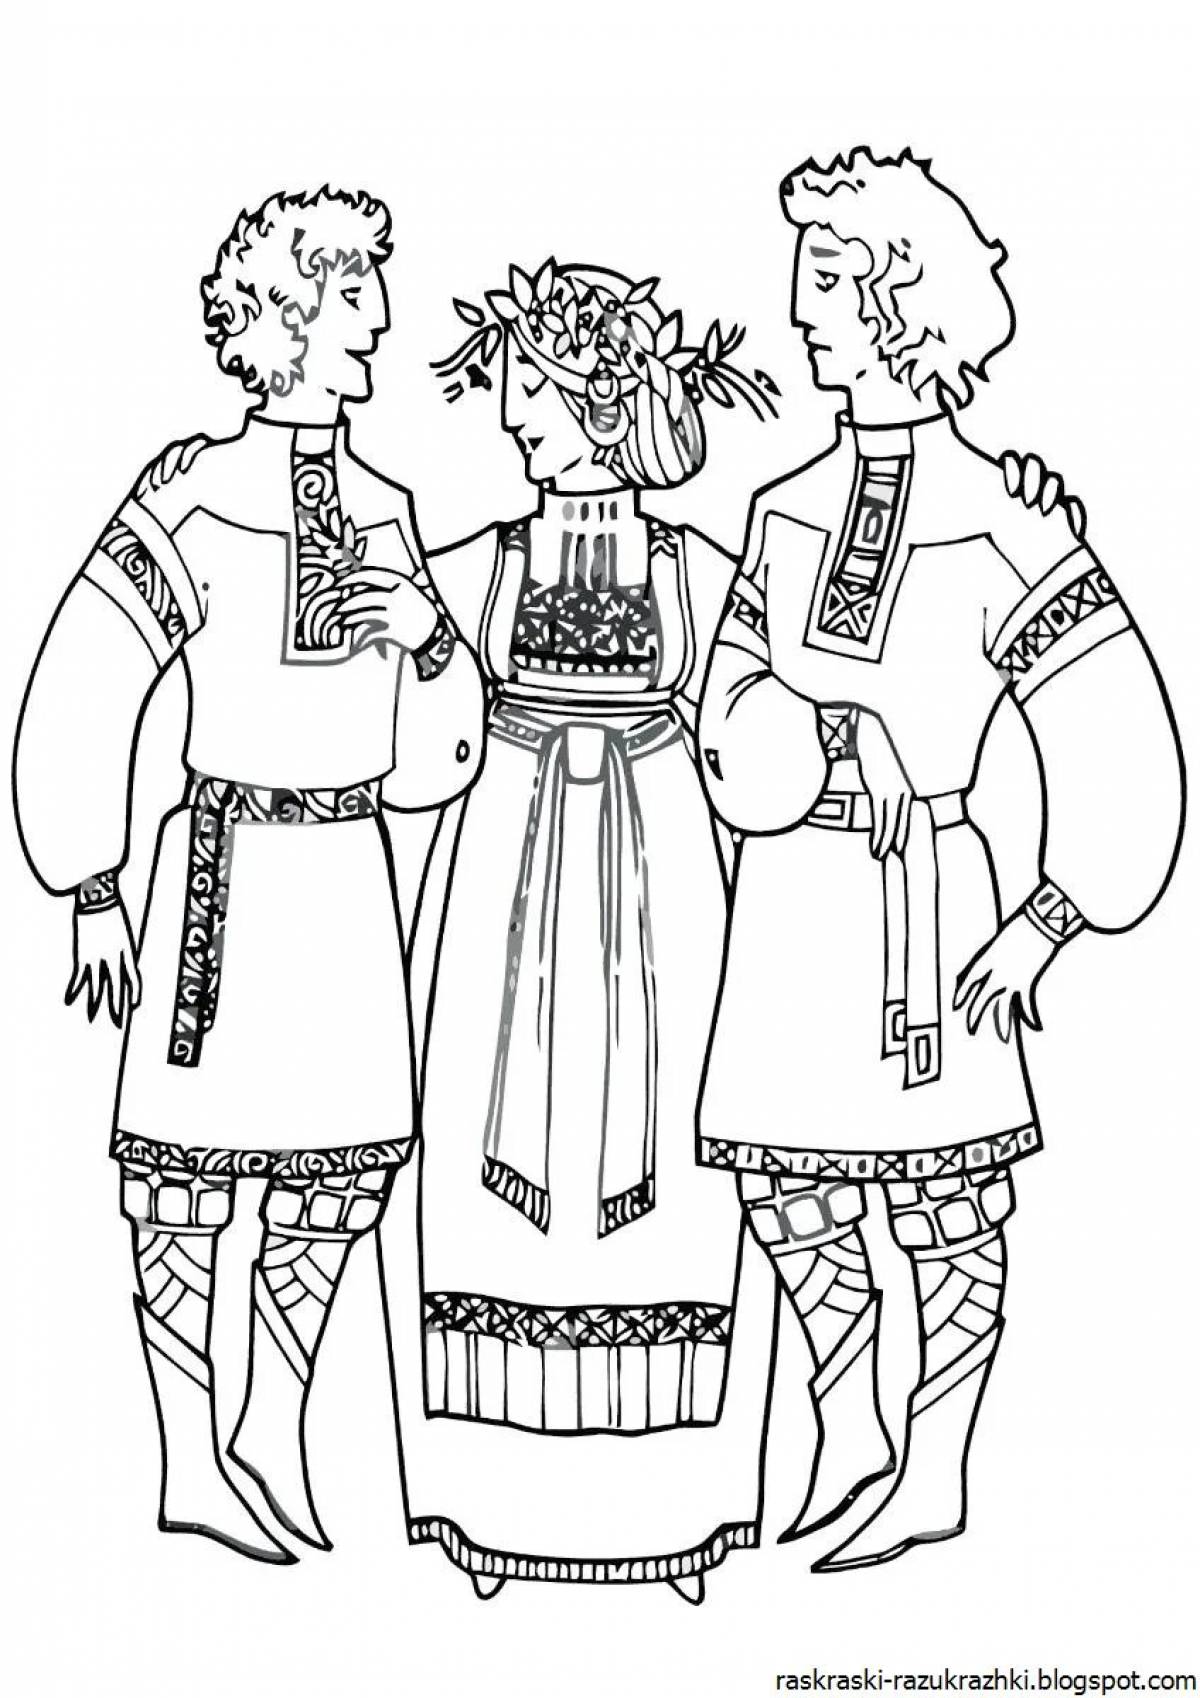 Fairytale russia and motherland coloring pages for kids